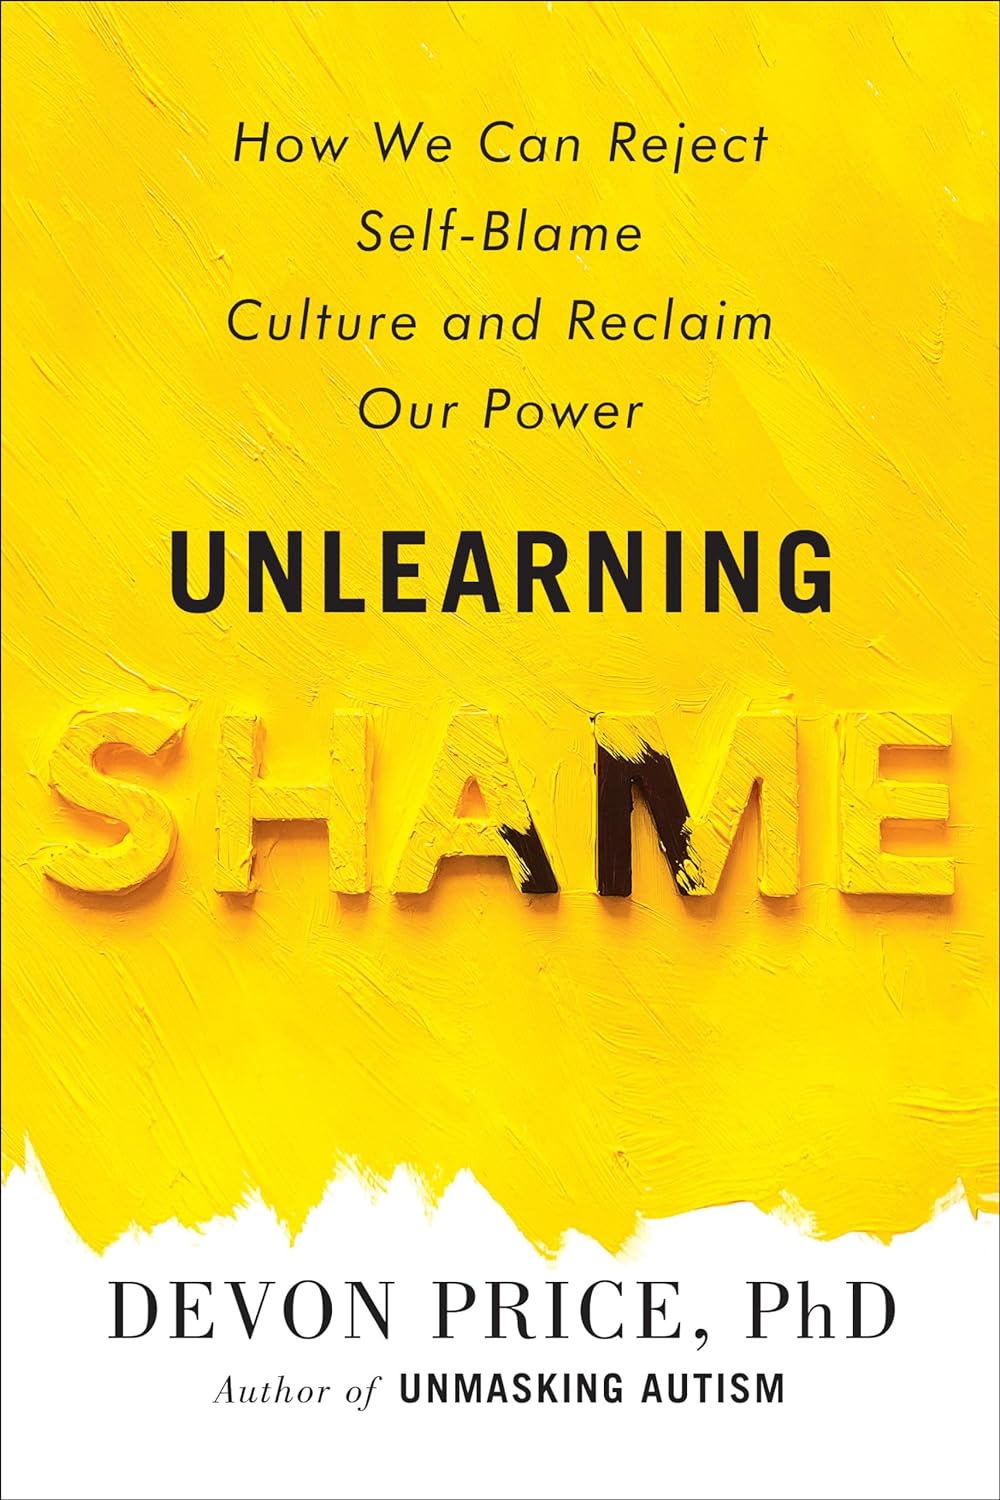 Unlearning Shame: How We Can Reject Self-Blame Culture and Reclaim Our Power [Devon Price PhD]